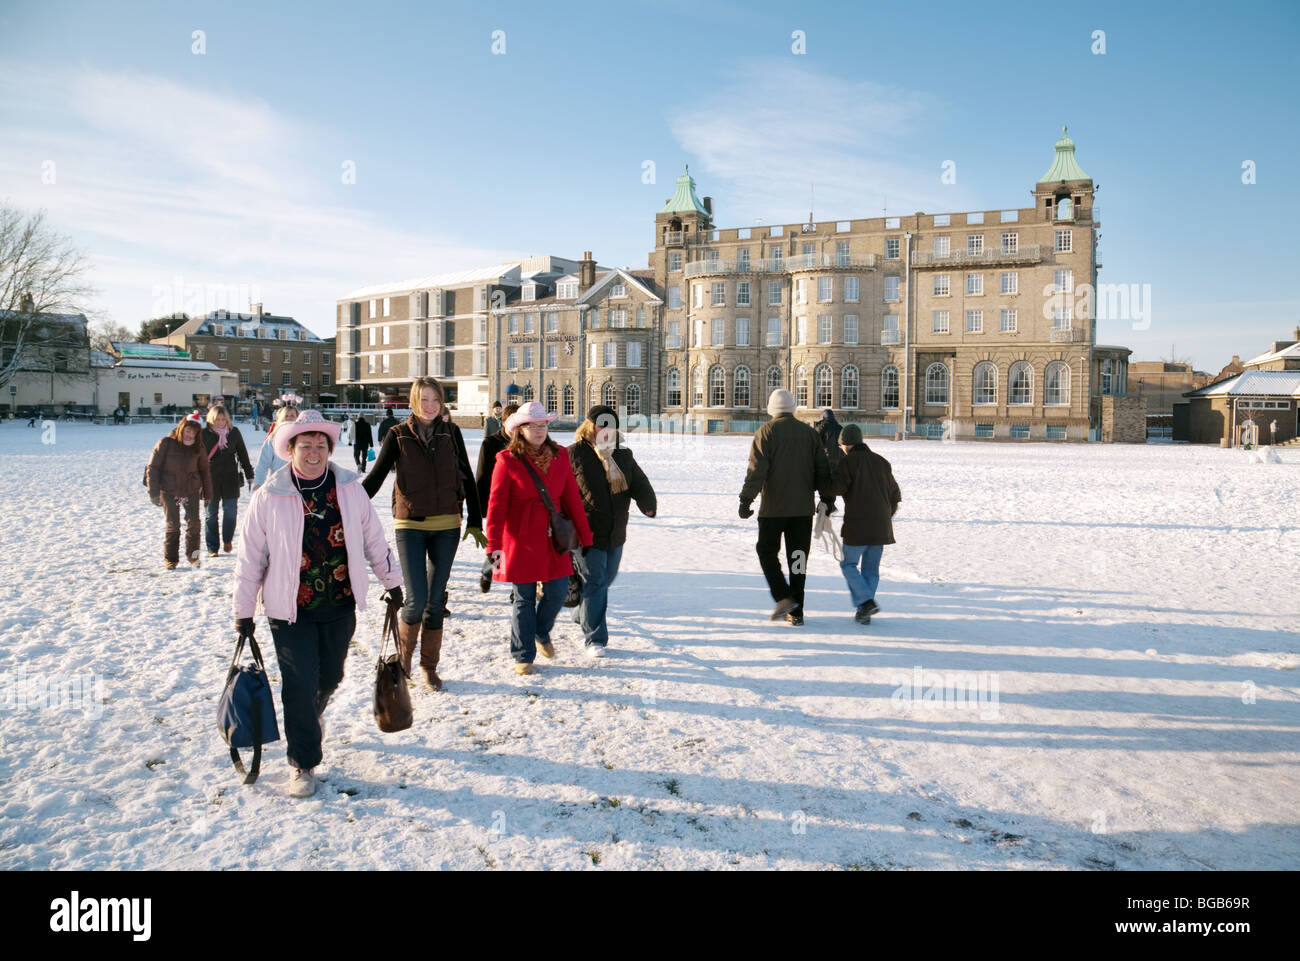 People outside The University Arms Hotel in winter, Parkers Piece, Cambridge, UK Stock Photo